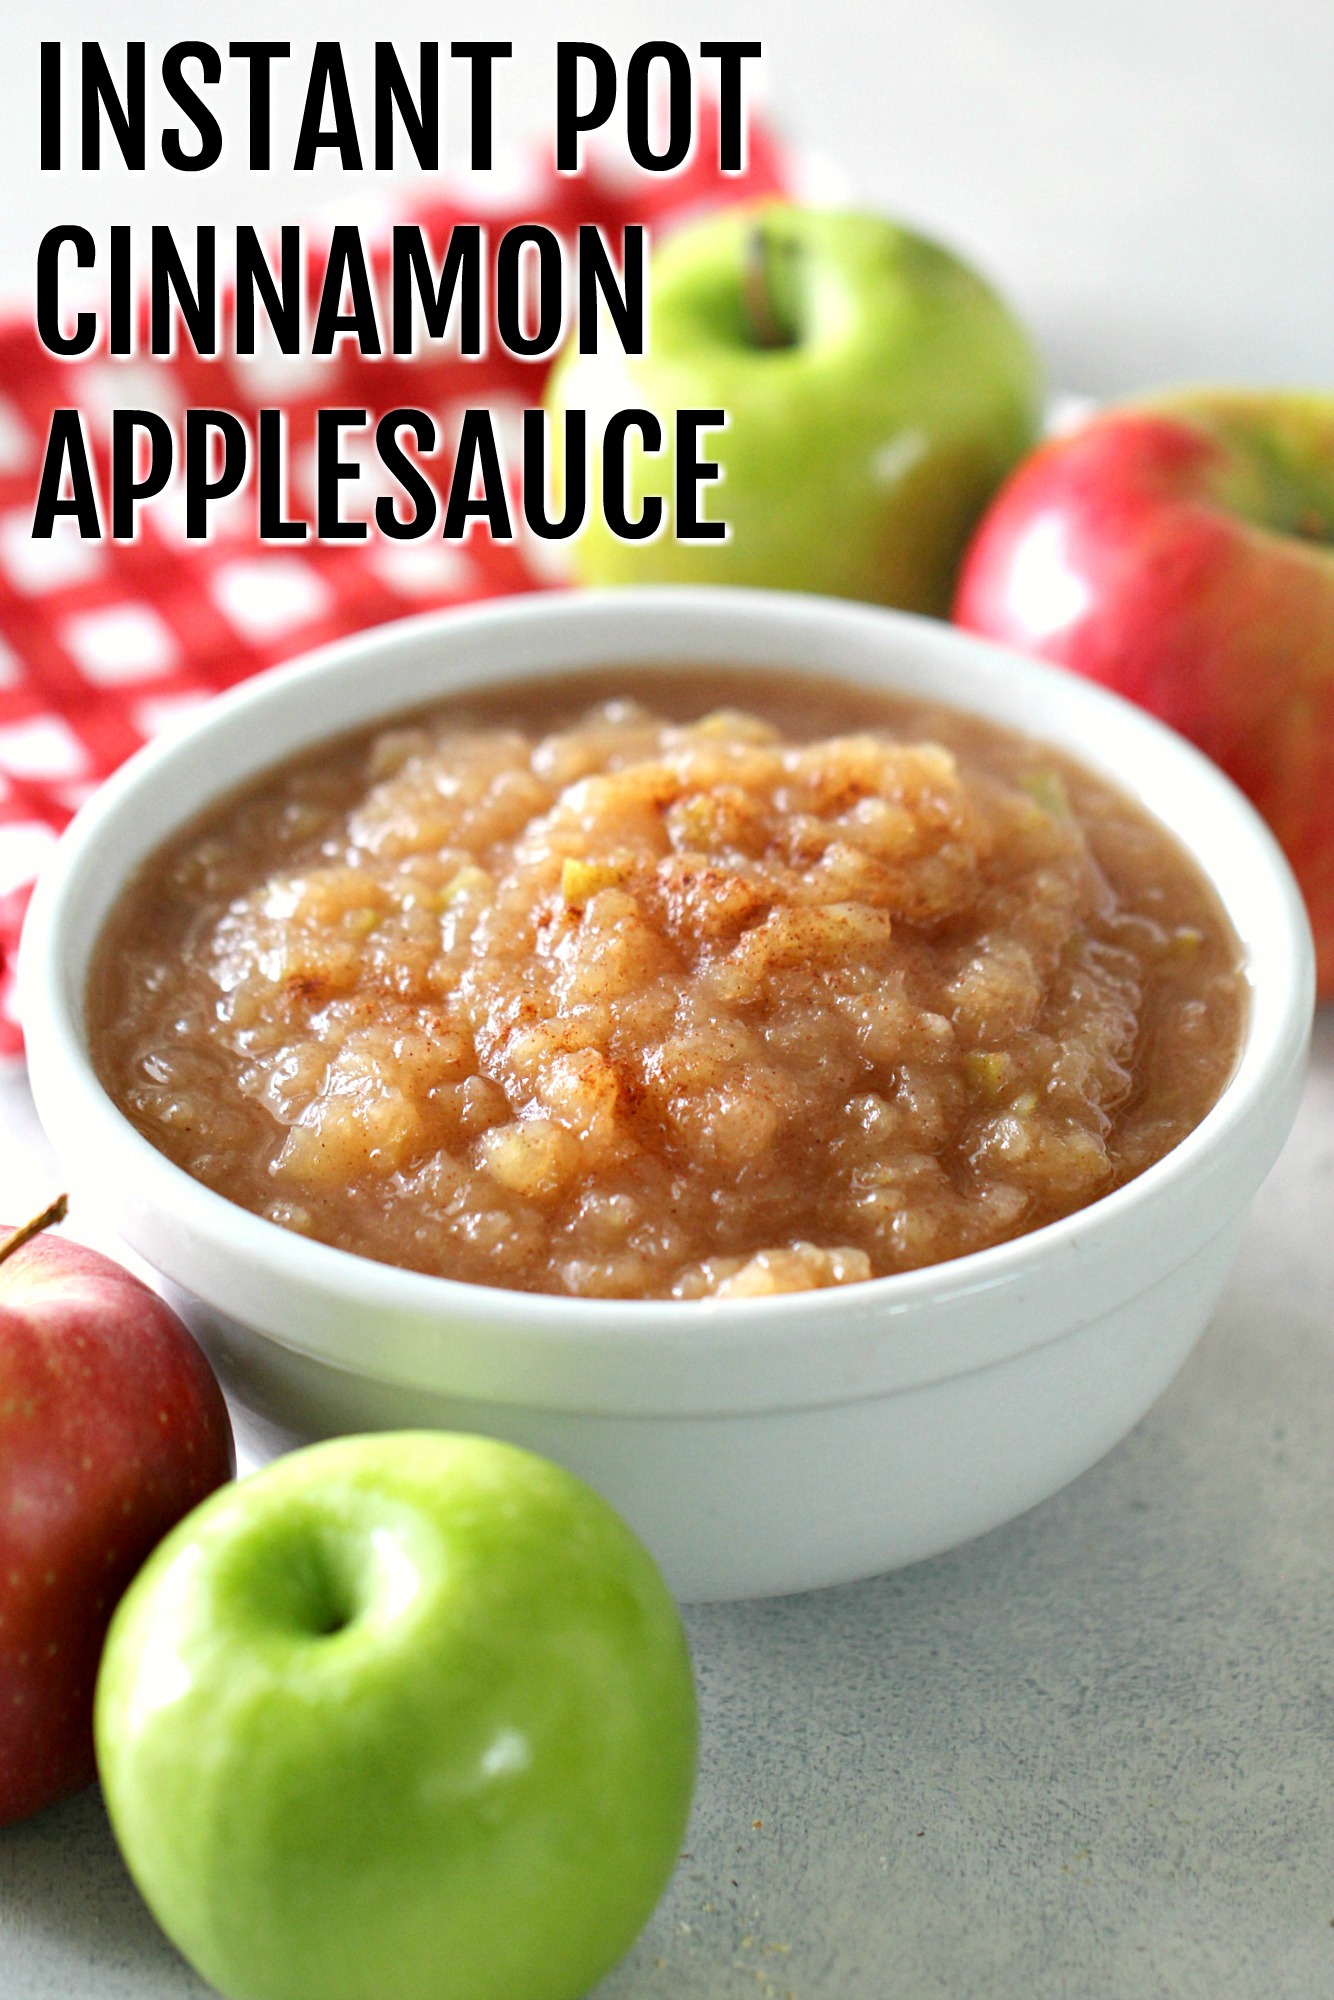 Instant Pot Cinnamon Applesauce in a bowl surrounded by apples